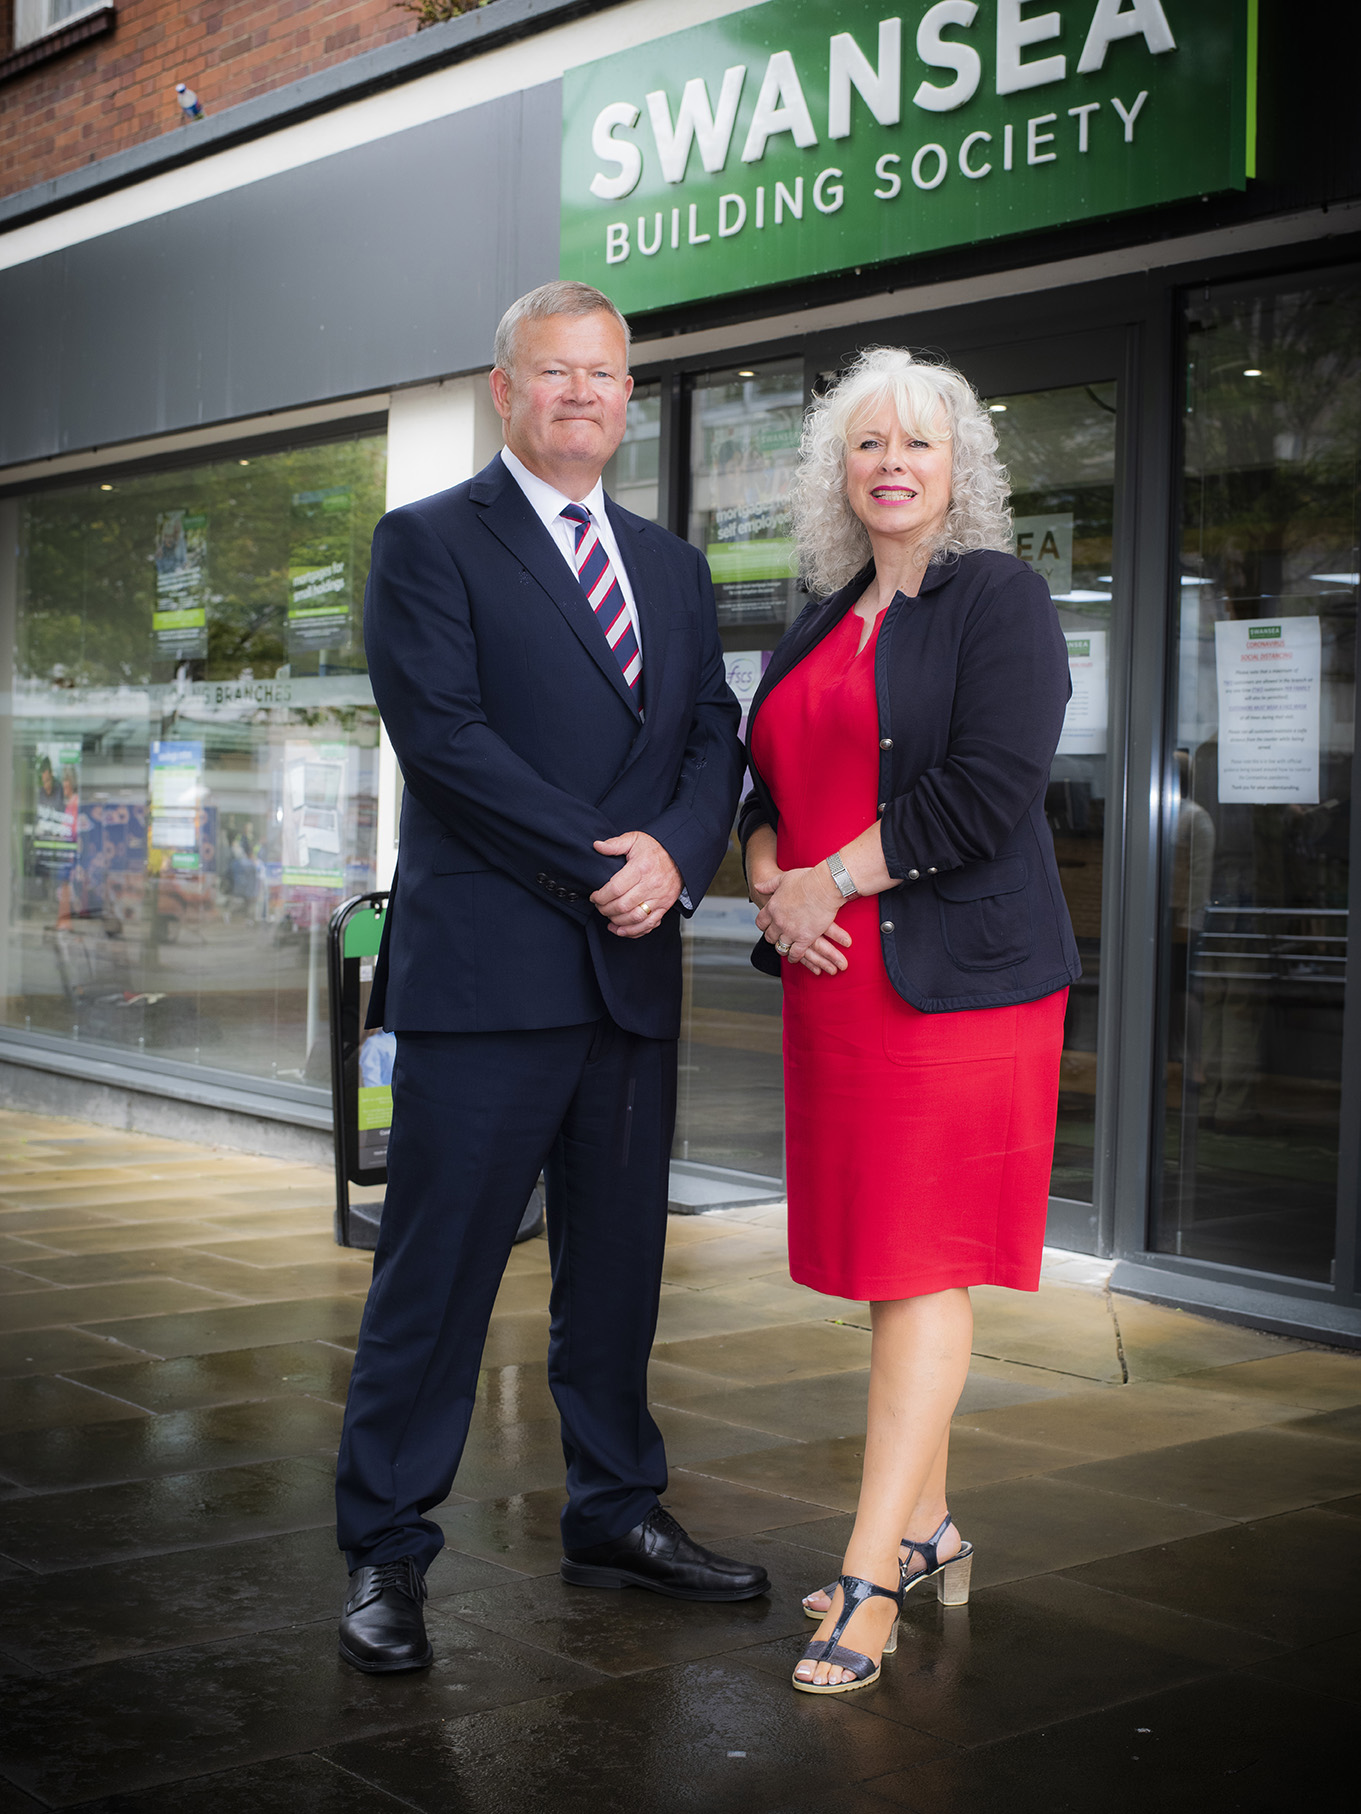 Our Carmarthen branch passes two significant milestones